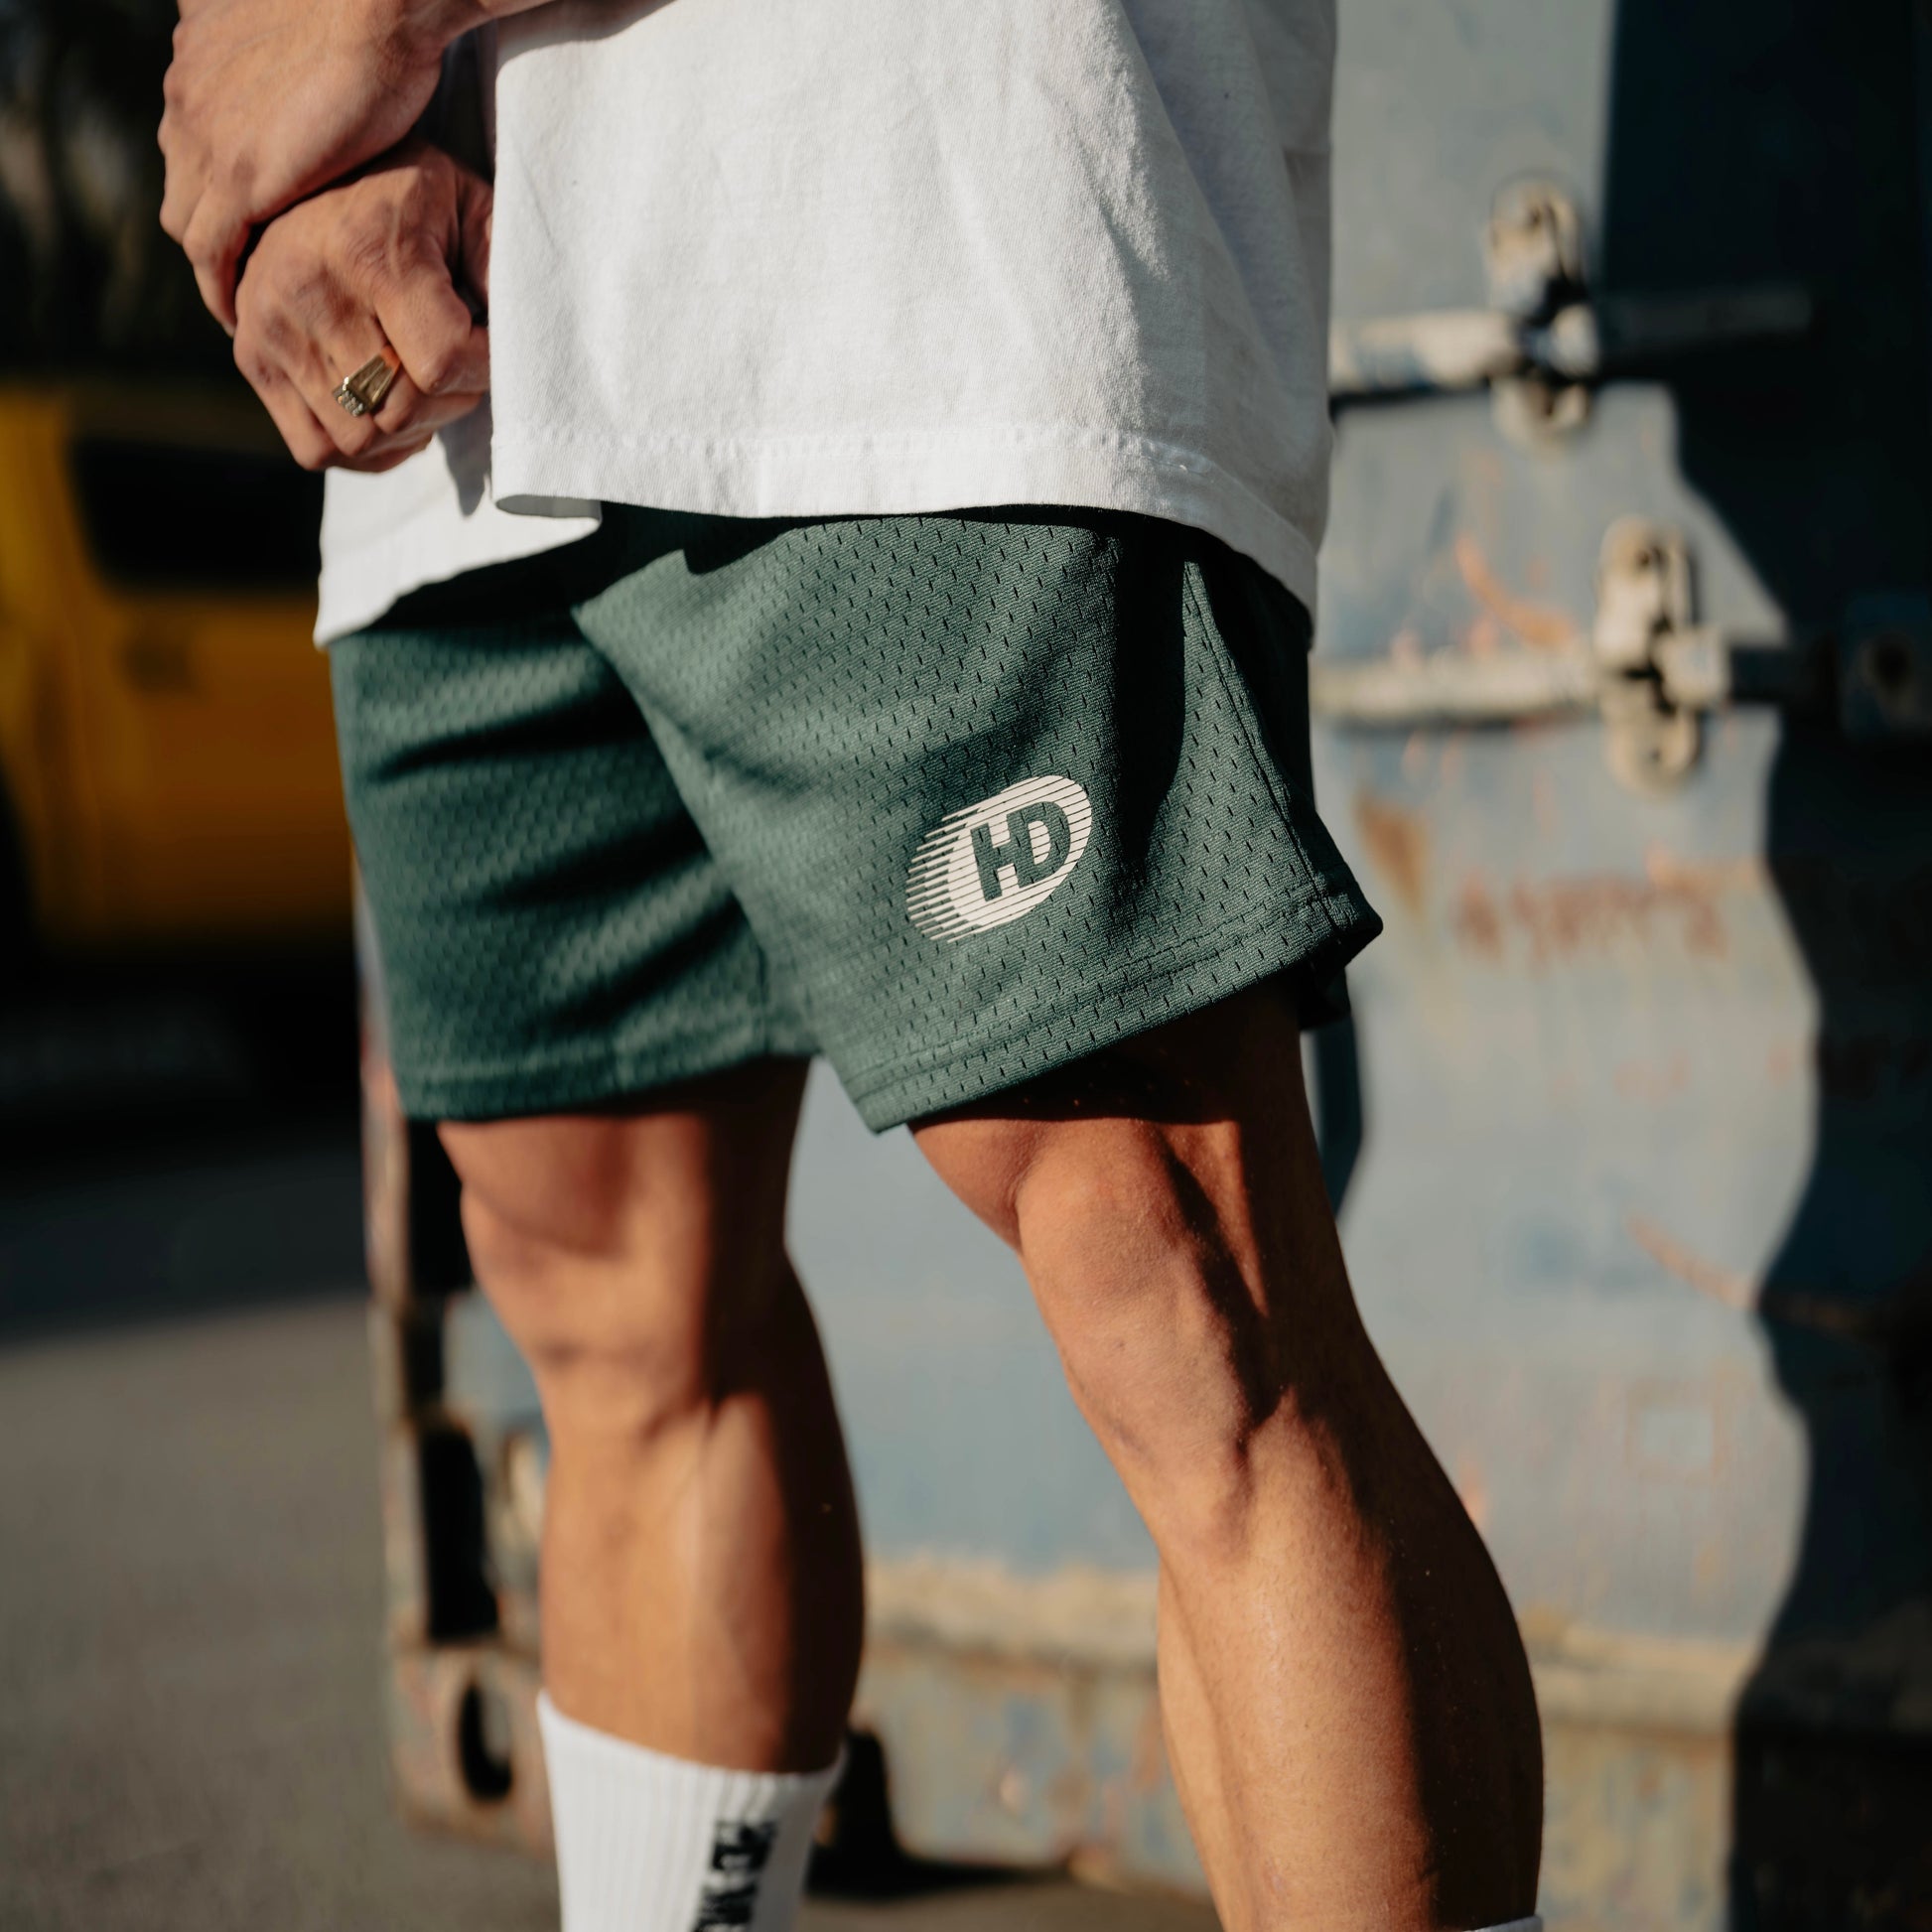 Community Mesh Shorts — Forest - HD MUSCLE CA